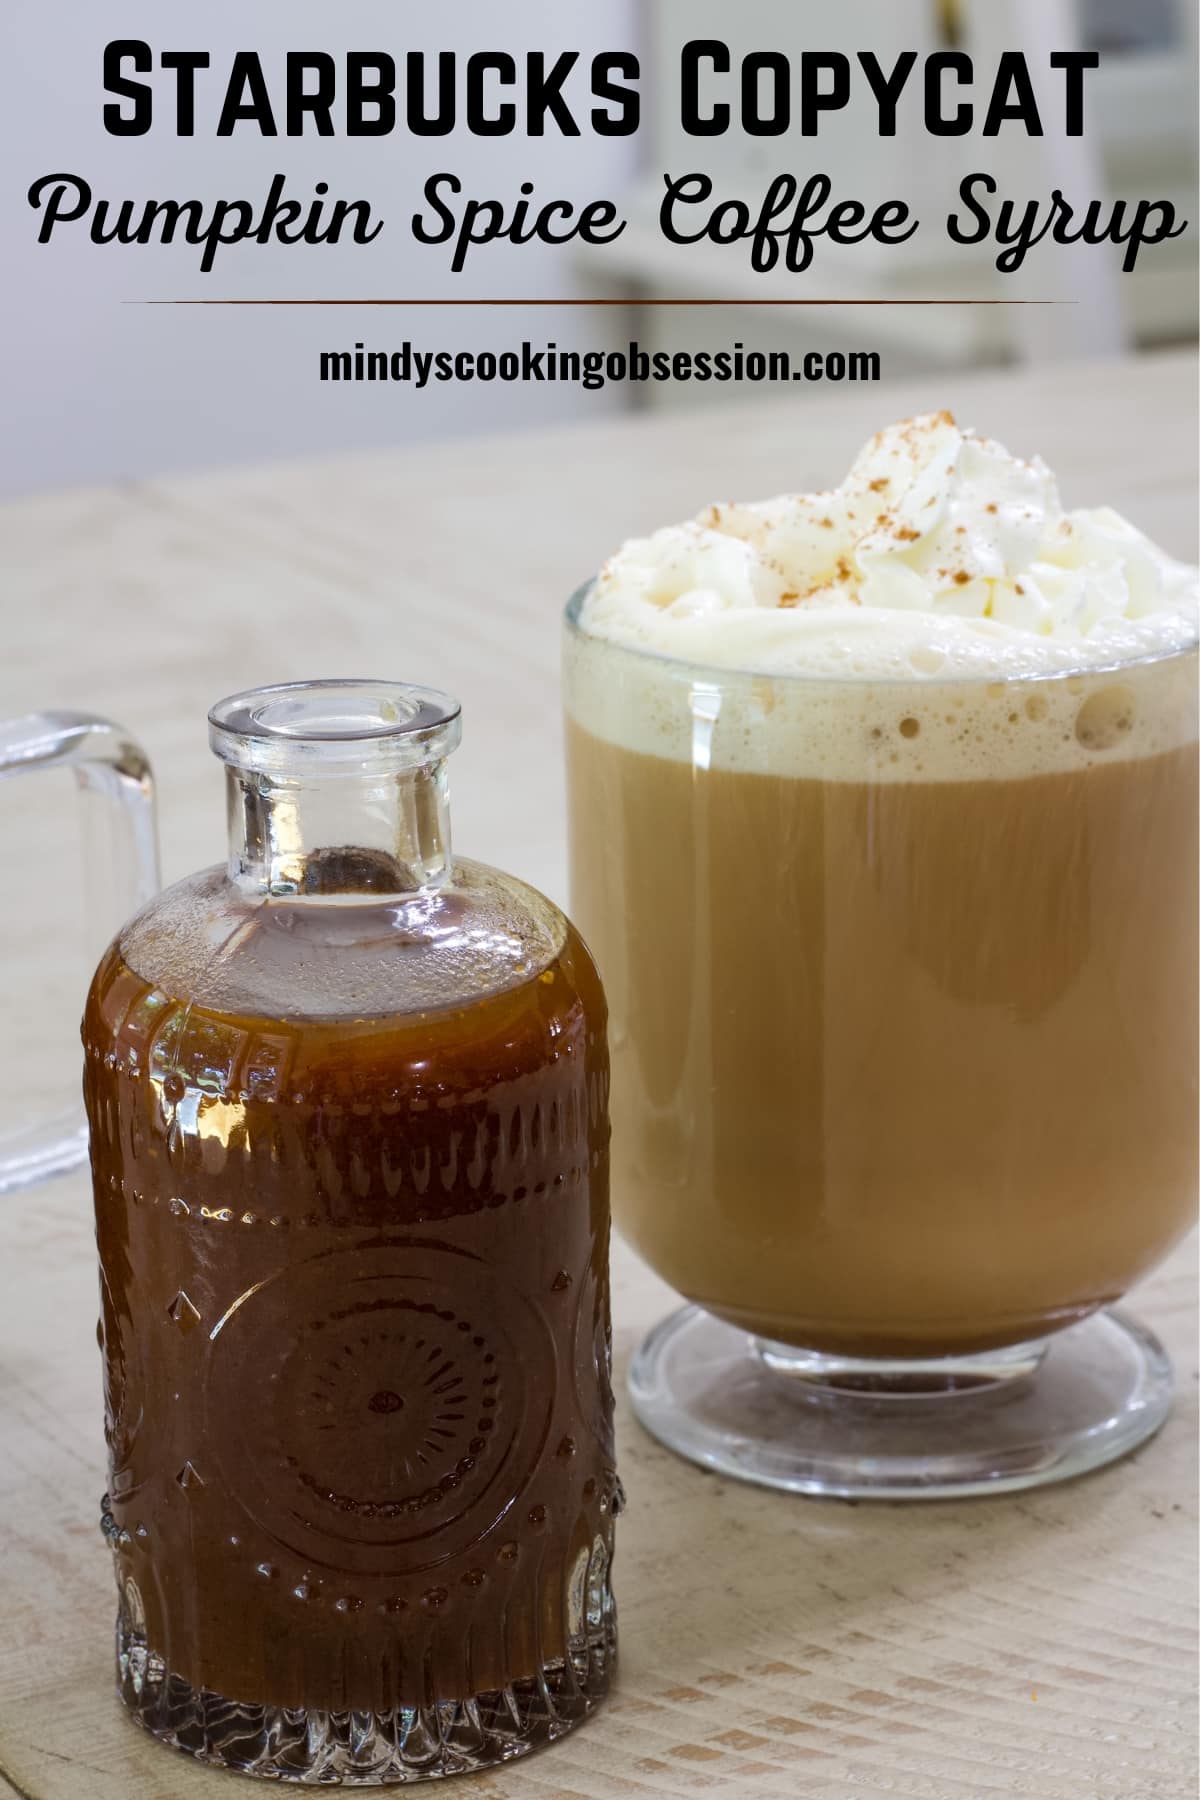 Easy Starbucks Pumpkin Spice Coffee Syrup Recipe can be added to coffee or latte. Great as dessert sauce or with maple syrup for pancakes.  via @mindyscookingobsession